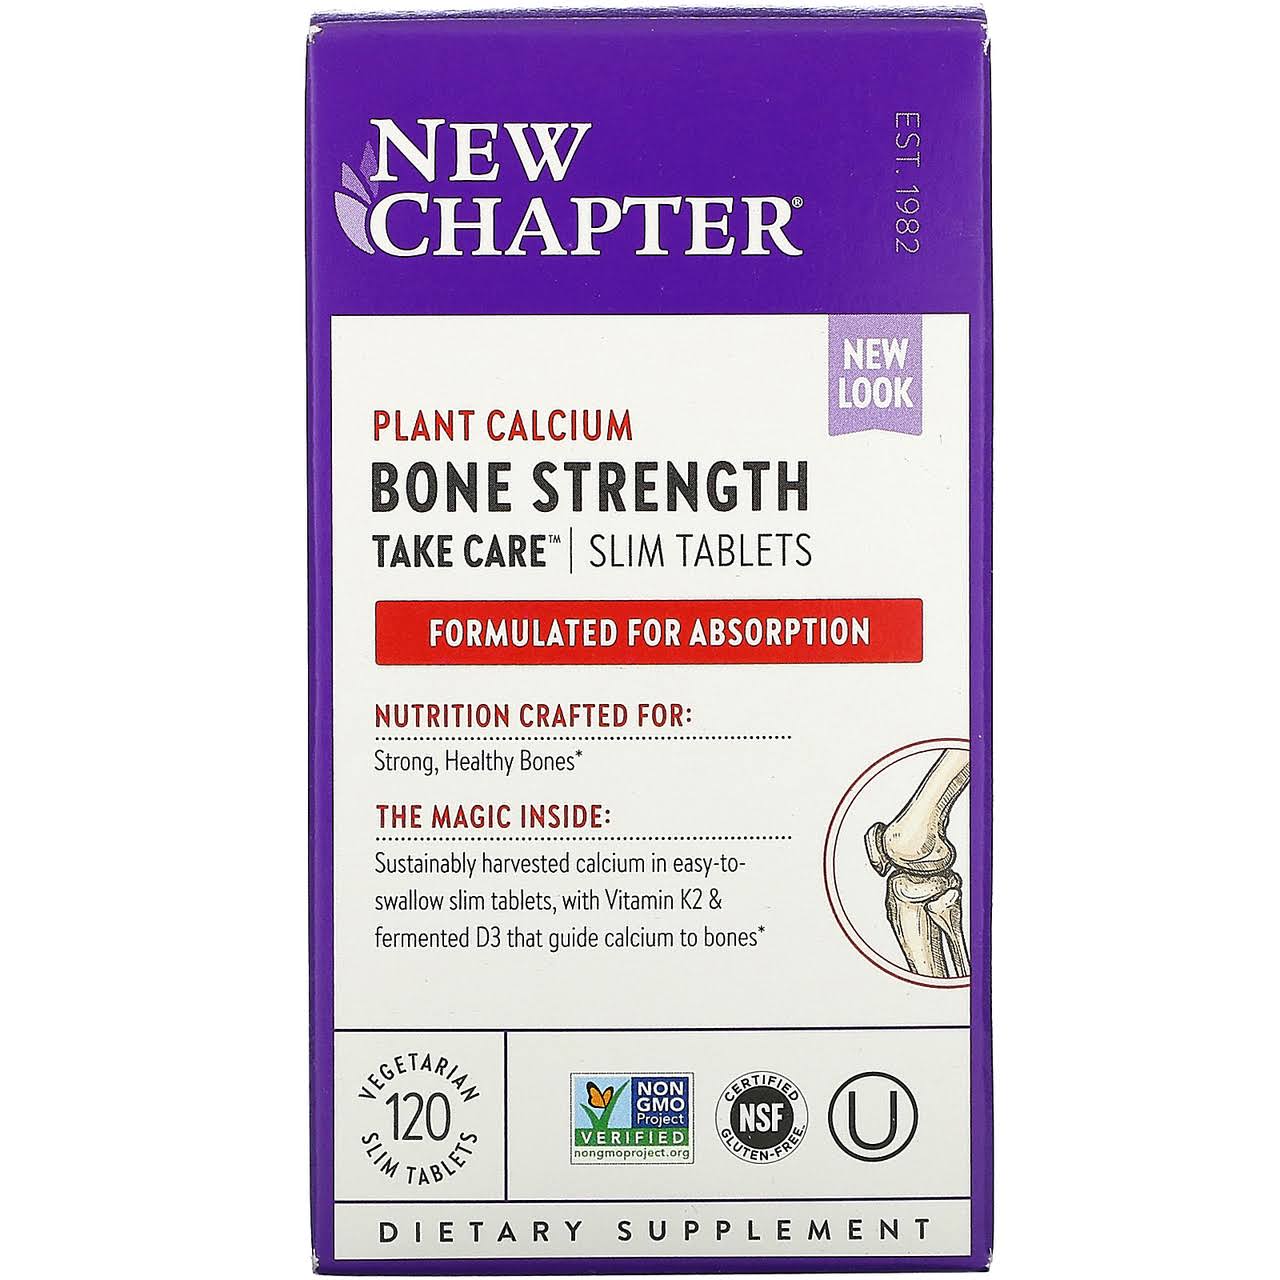 New Chapter Bone Strength Take Care Slim Tablets - 120 Tablets